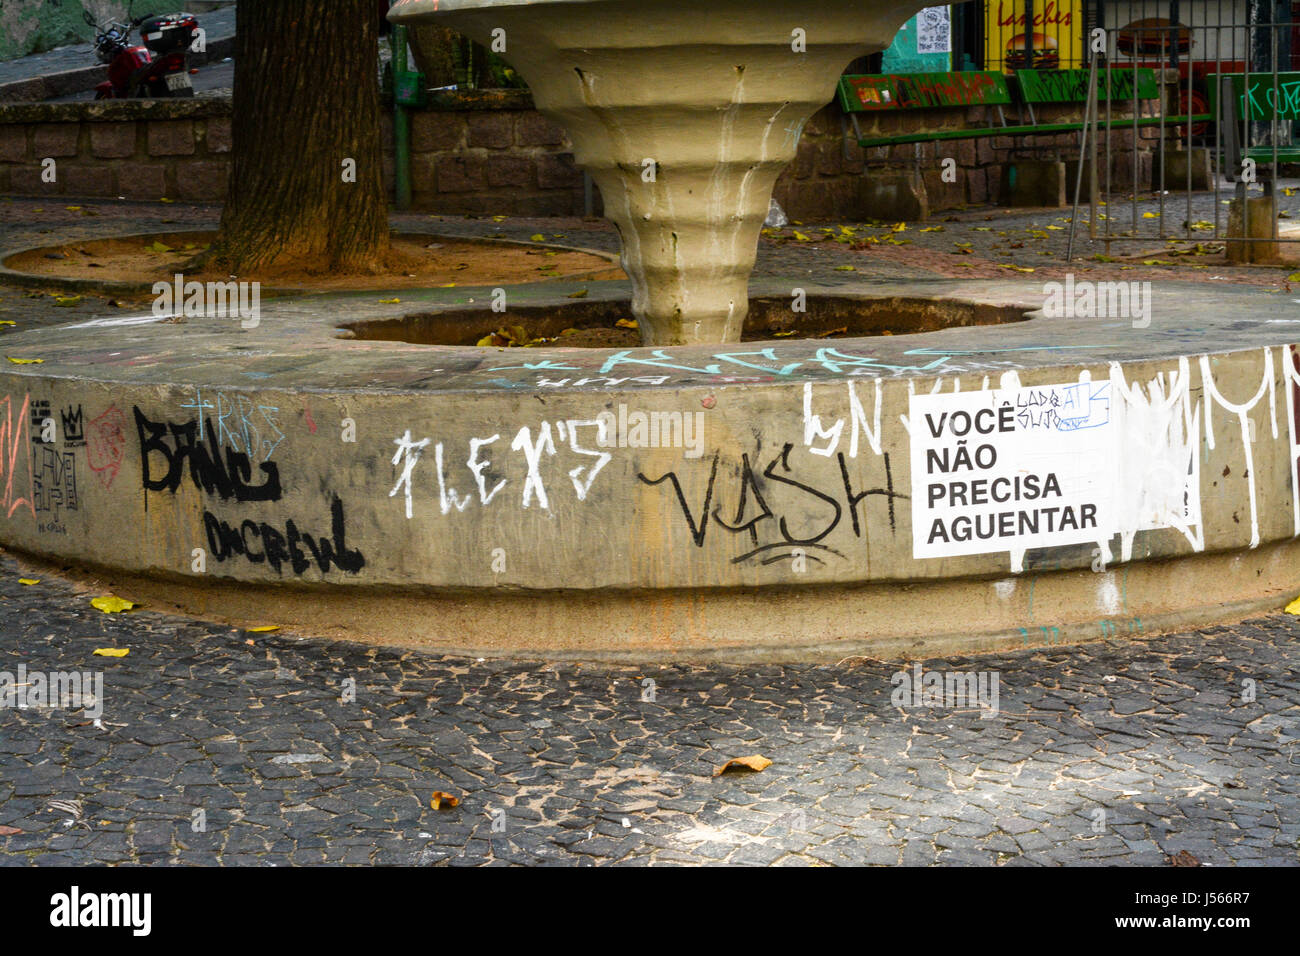 Porto Alegre, Brazil. 14th June, 2008. Project foresees increase of fines against vandalism in Porto Alegre, with a fine of up to R $ 391 thousand. Project prepared by the municipality of Poa also gives municipal agents administrative police power. Credit: Omar de Oliveira/FotoArena/Alamy Live News Stock Photo